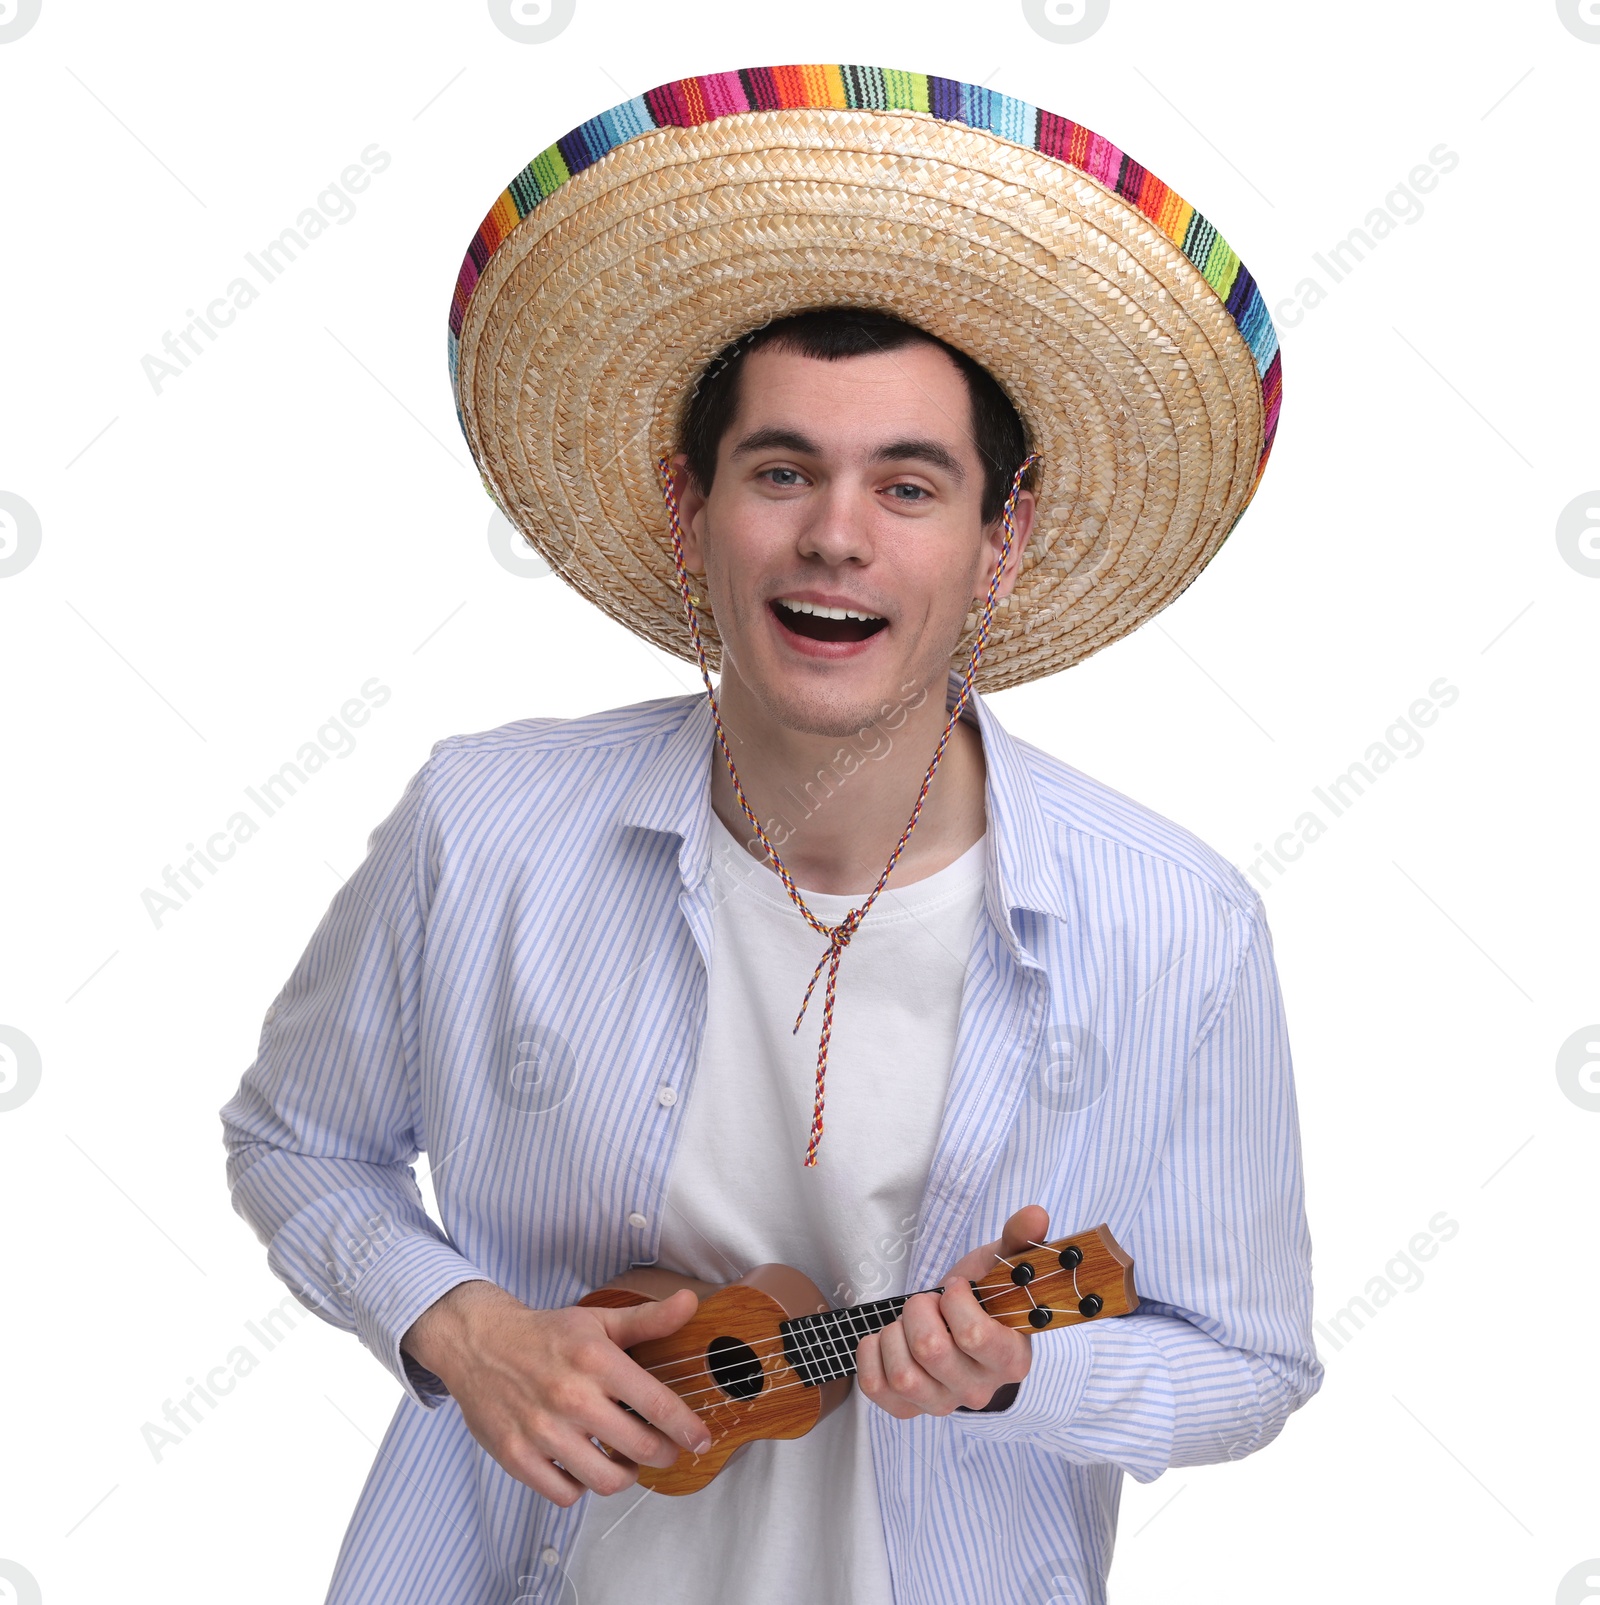 Photo of Young man in Mexican sombrero hat playing ukulele on white background